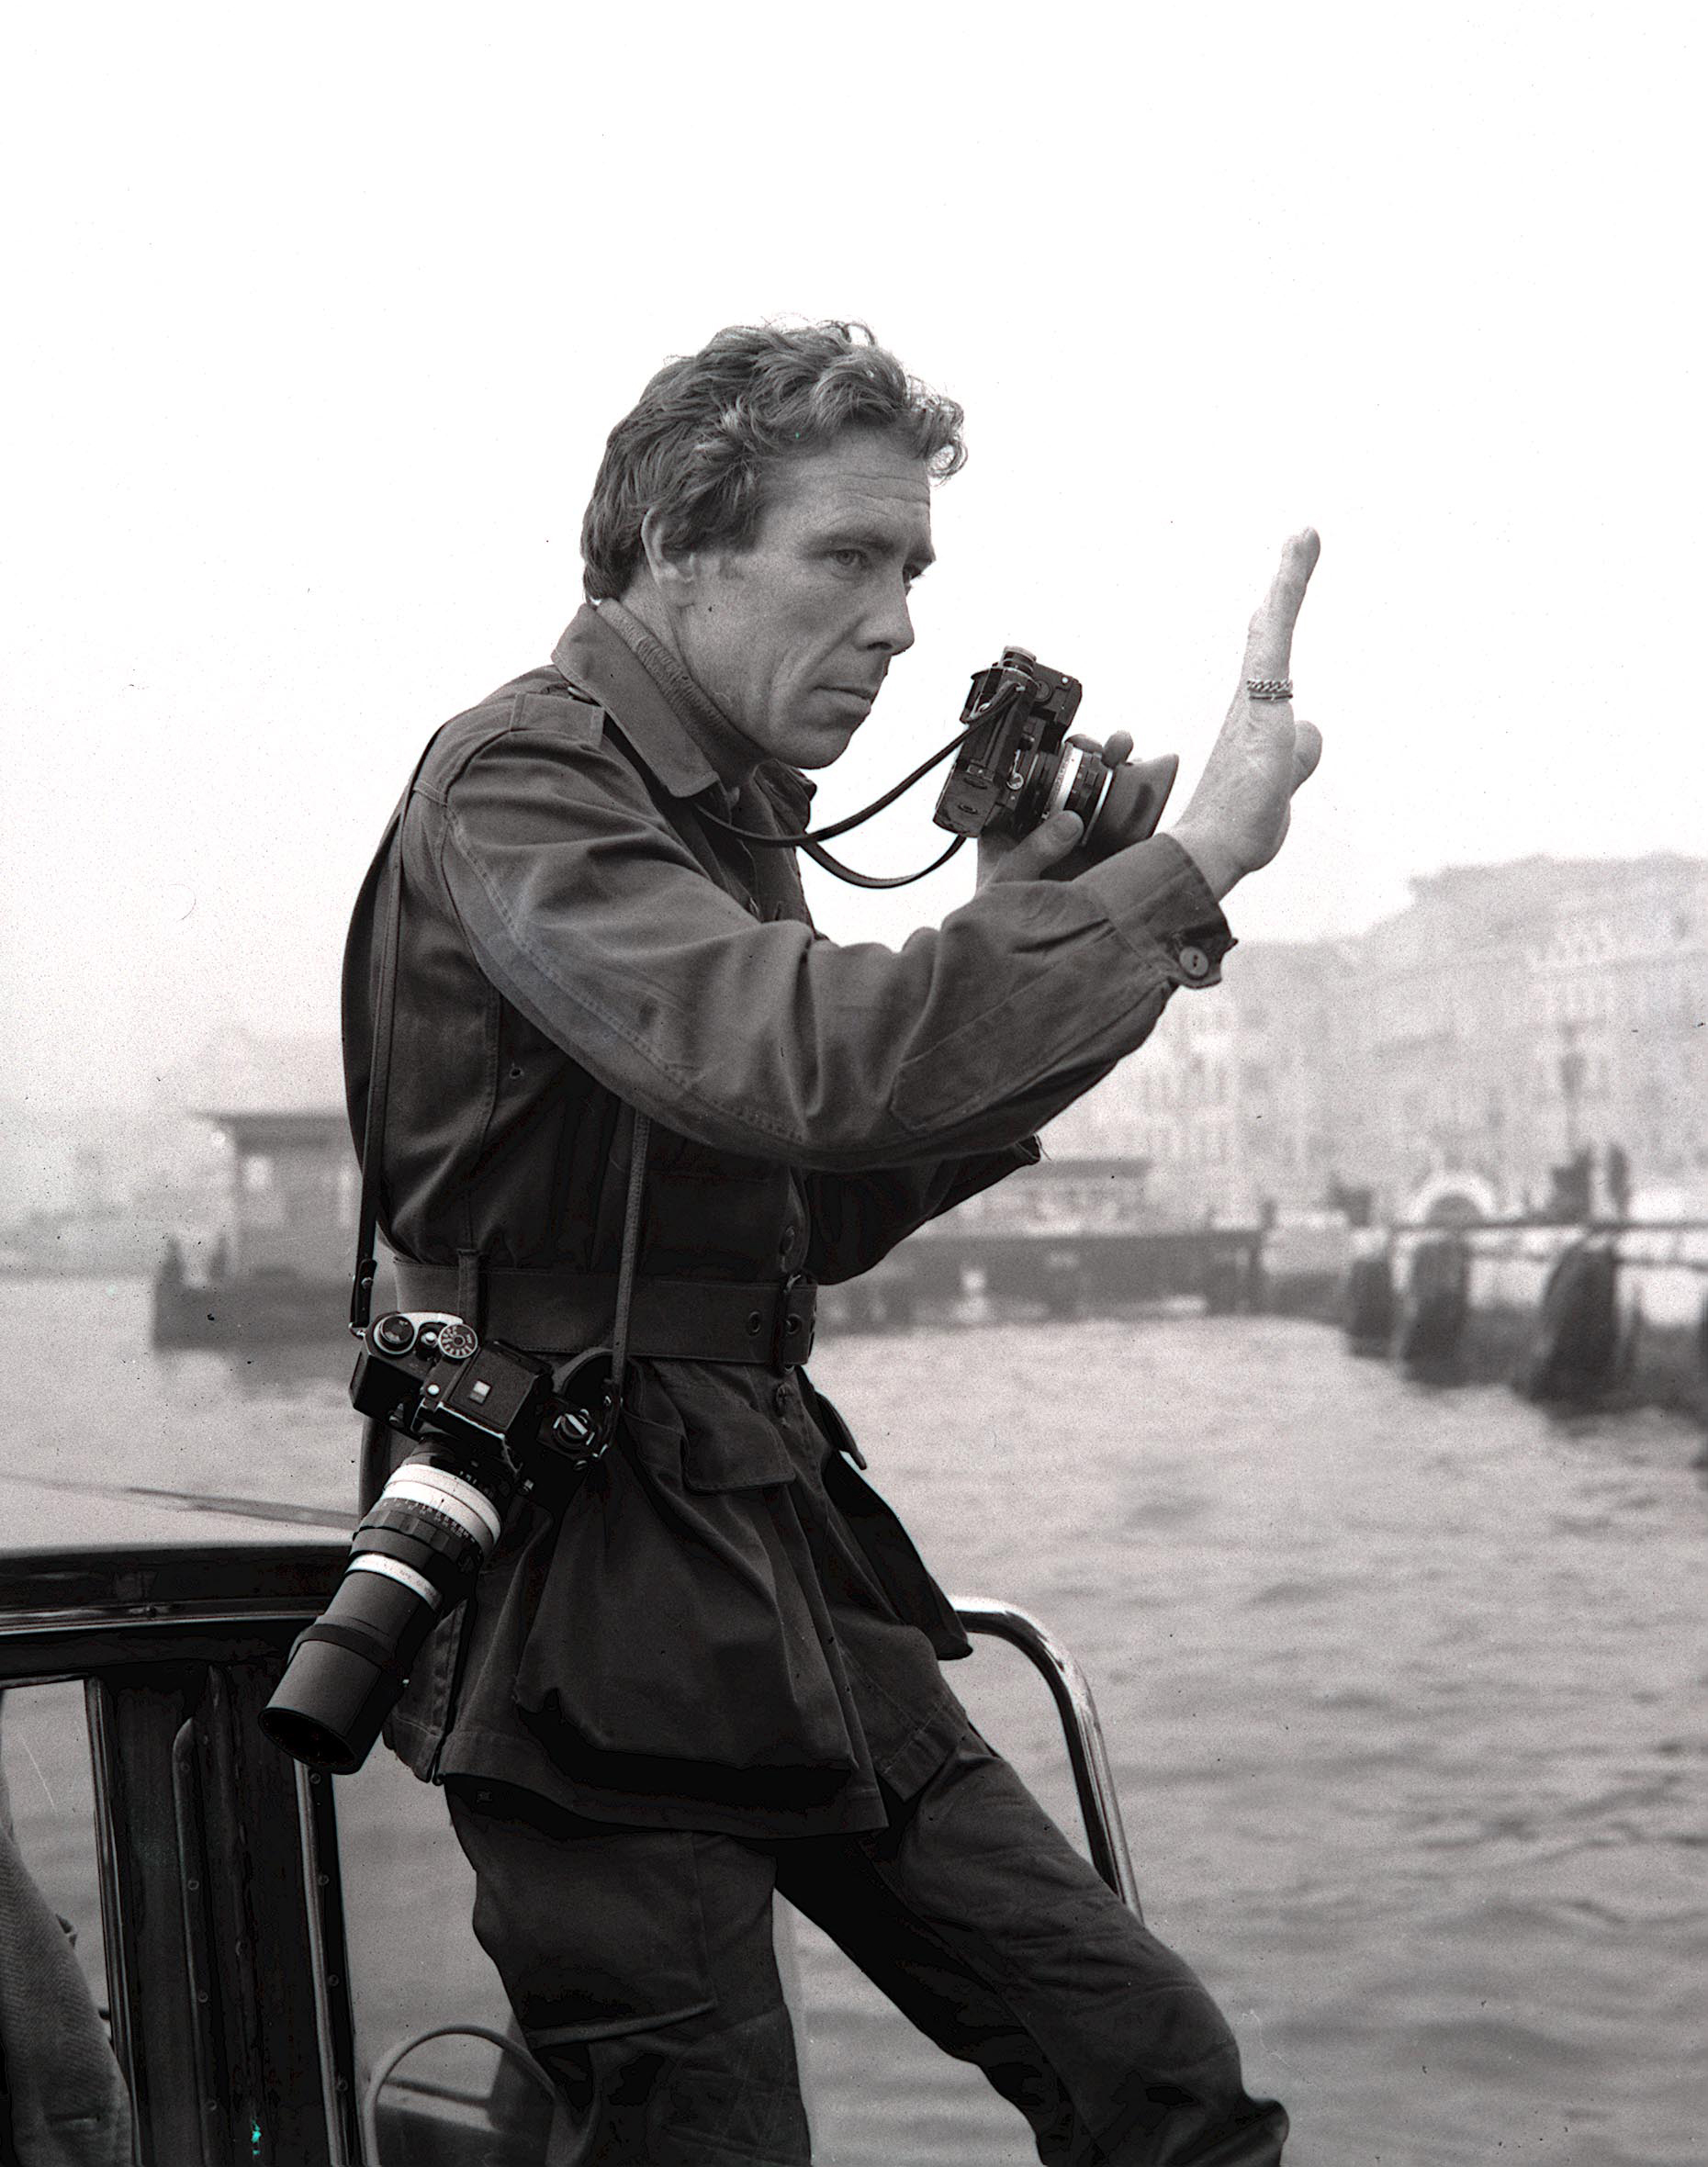 Photographer Lord Snowdon, husband of Princess Margaret, pictured at work in Venice, Italy on Oct. 14, 1971. (Popperfoto—Getty Images)